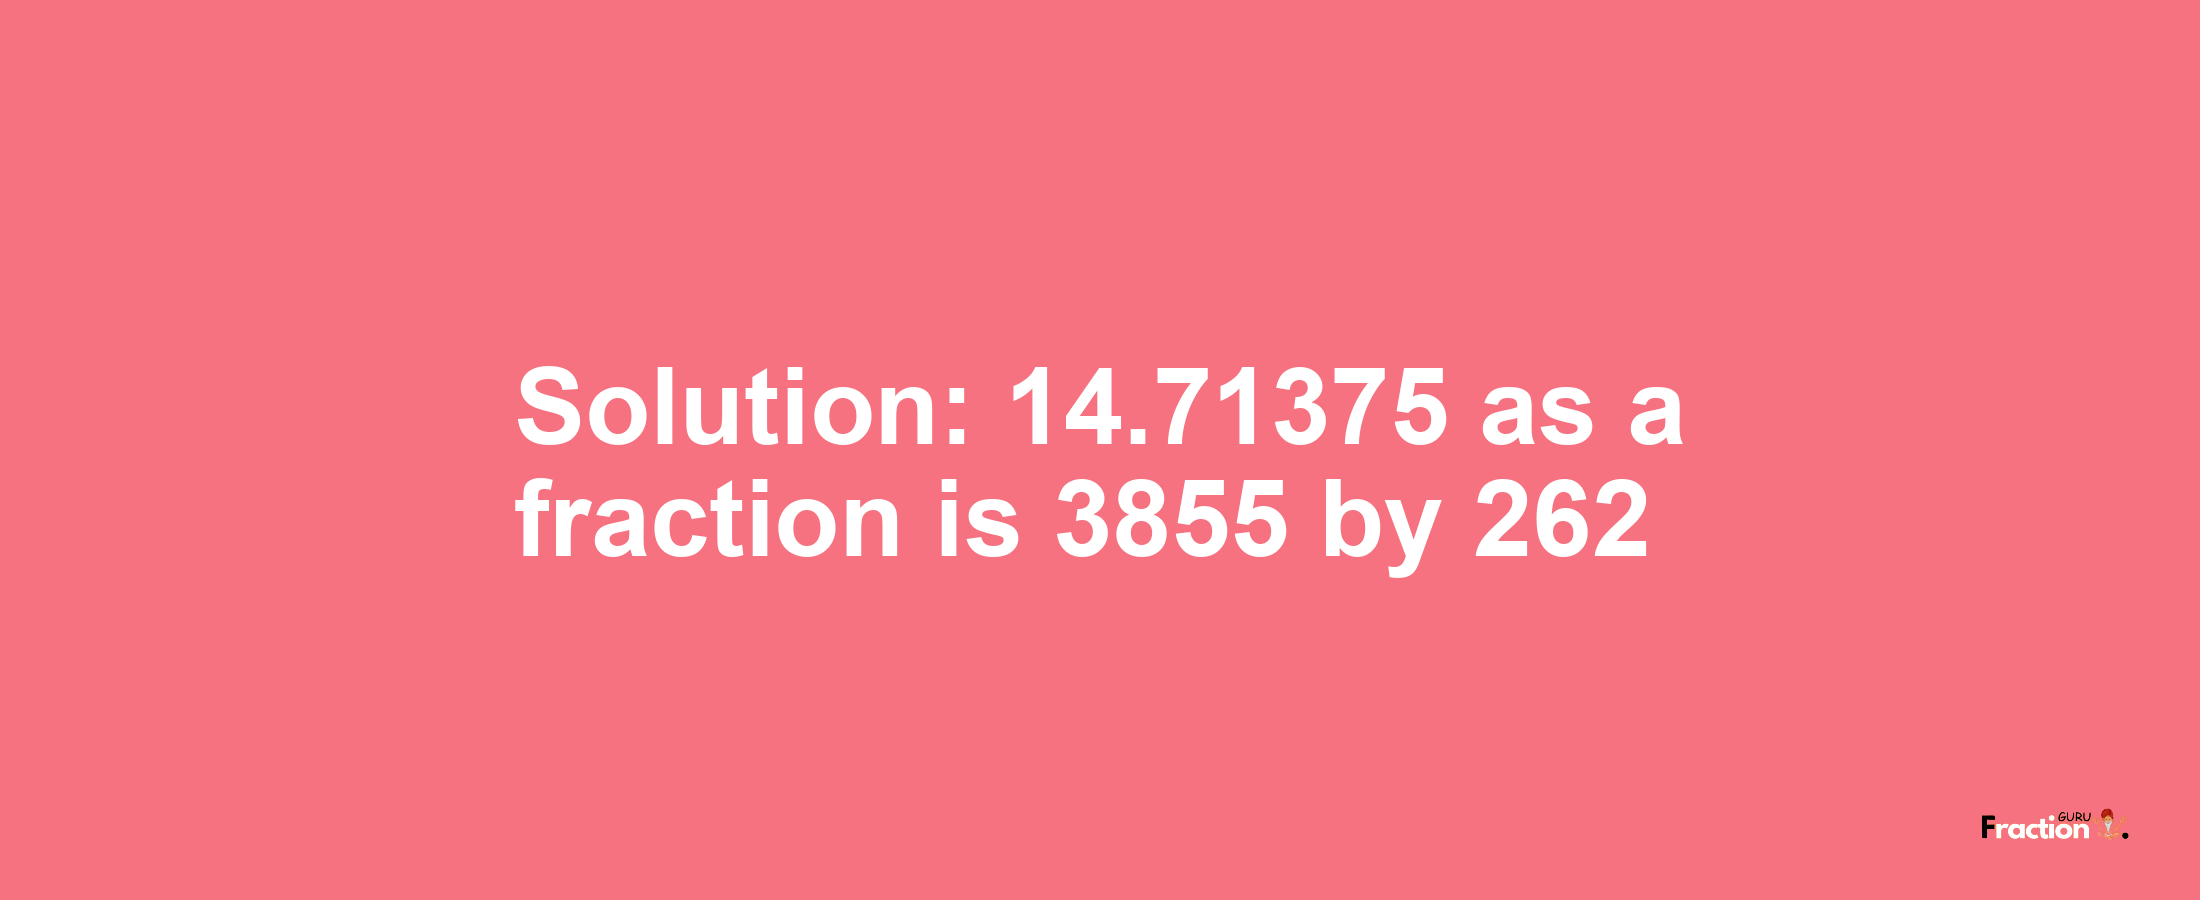 Solution:14.71375 as a fraction is 3855/262